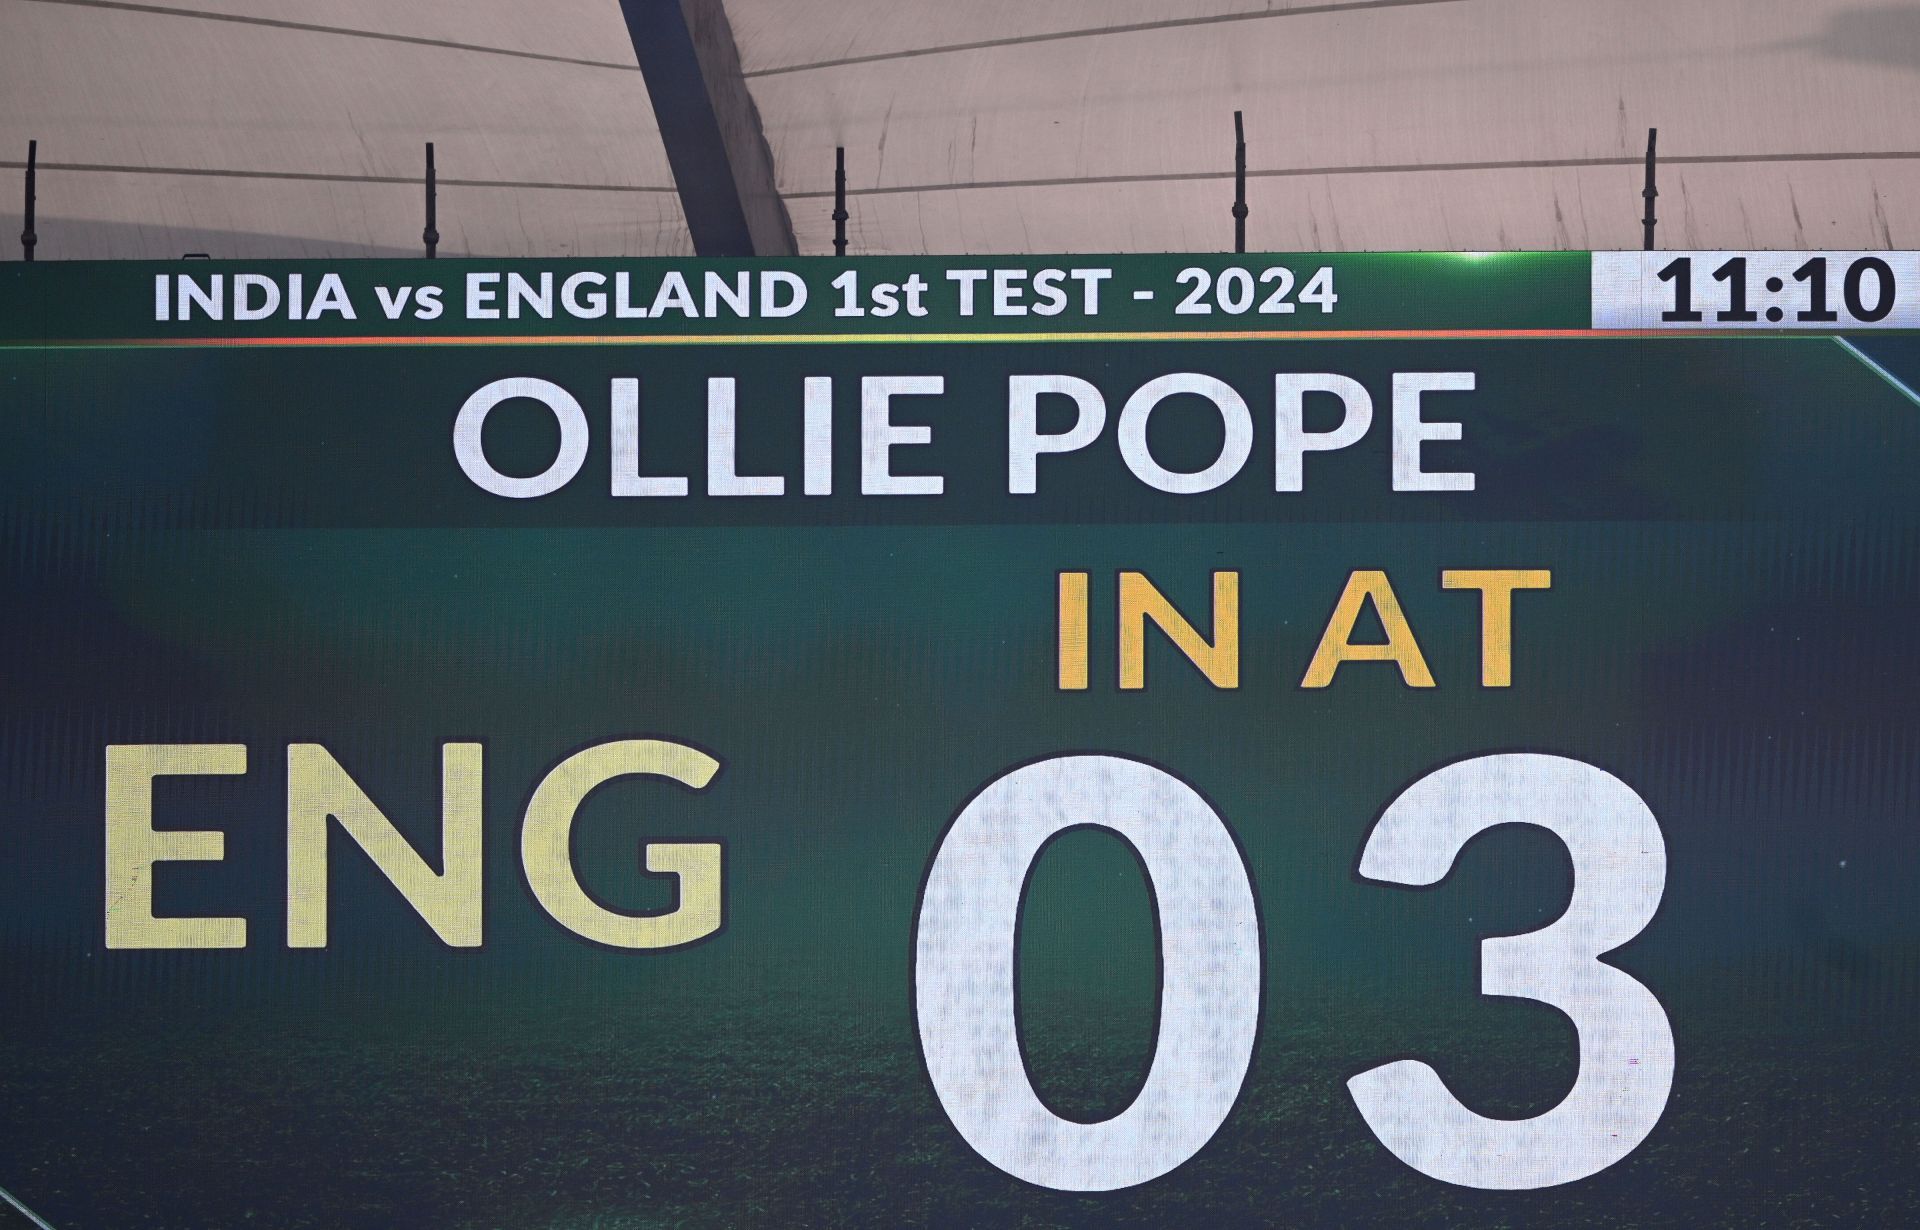 Ollie Pope took the game away from India in Hyderabad.